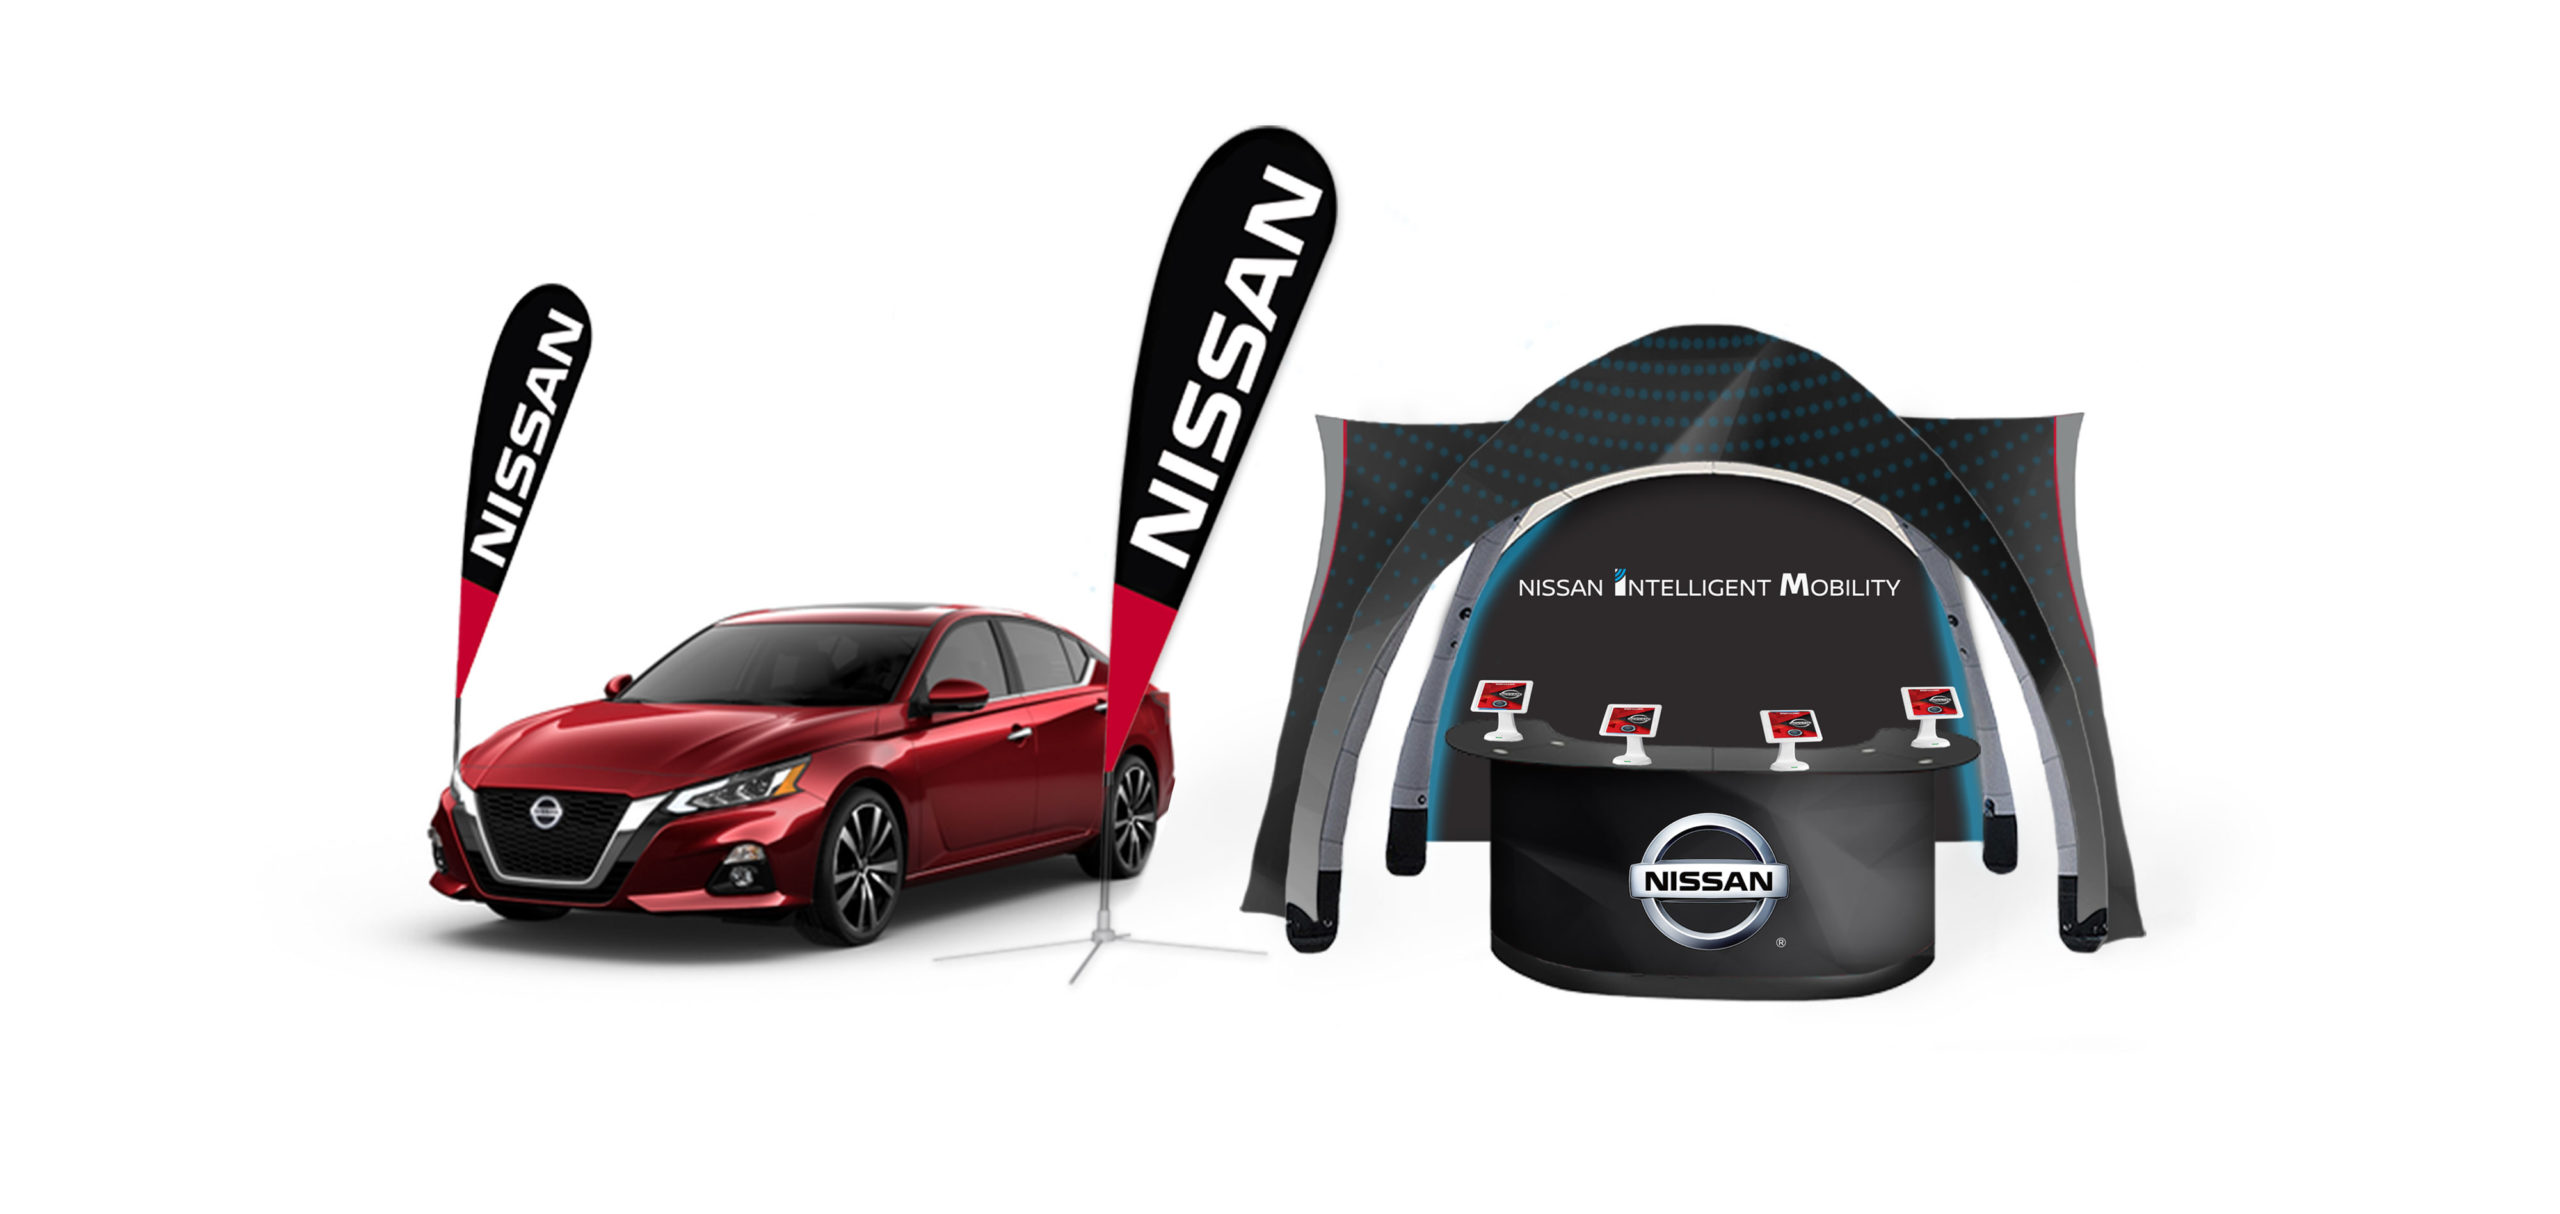 Nissan tent and banners